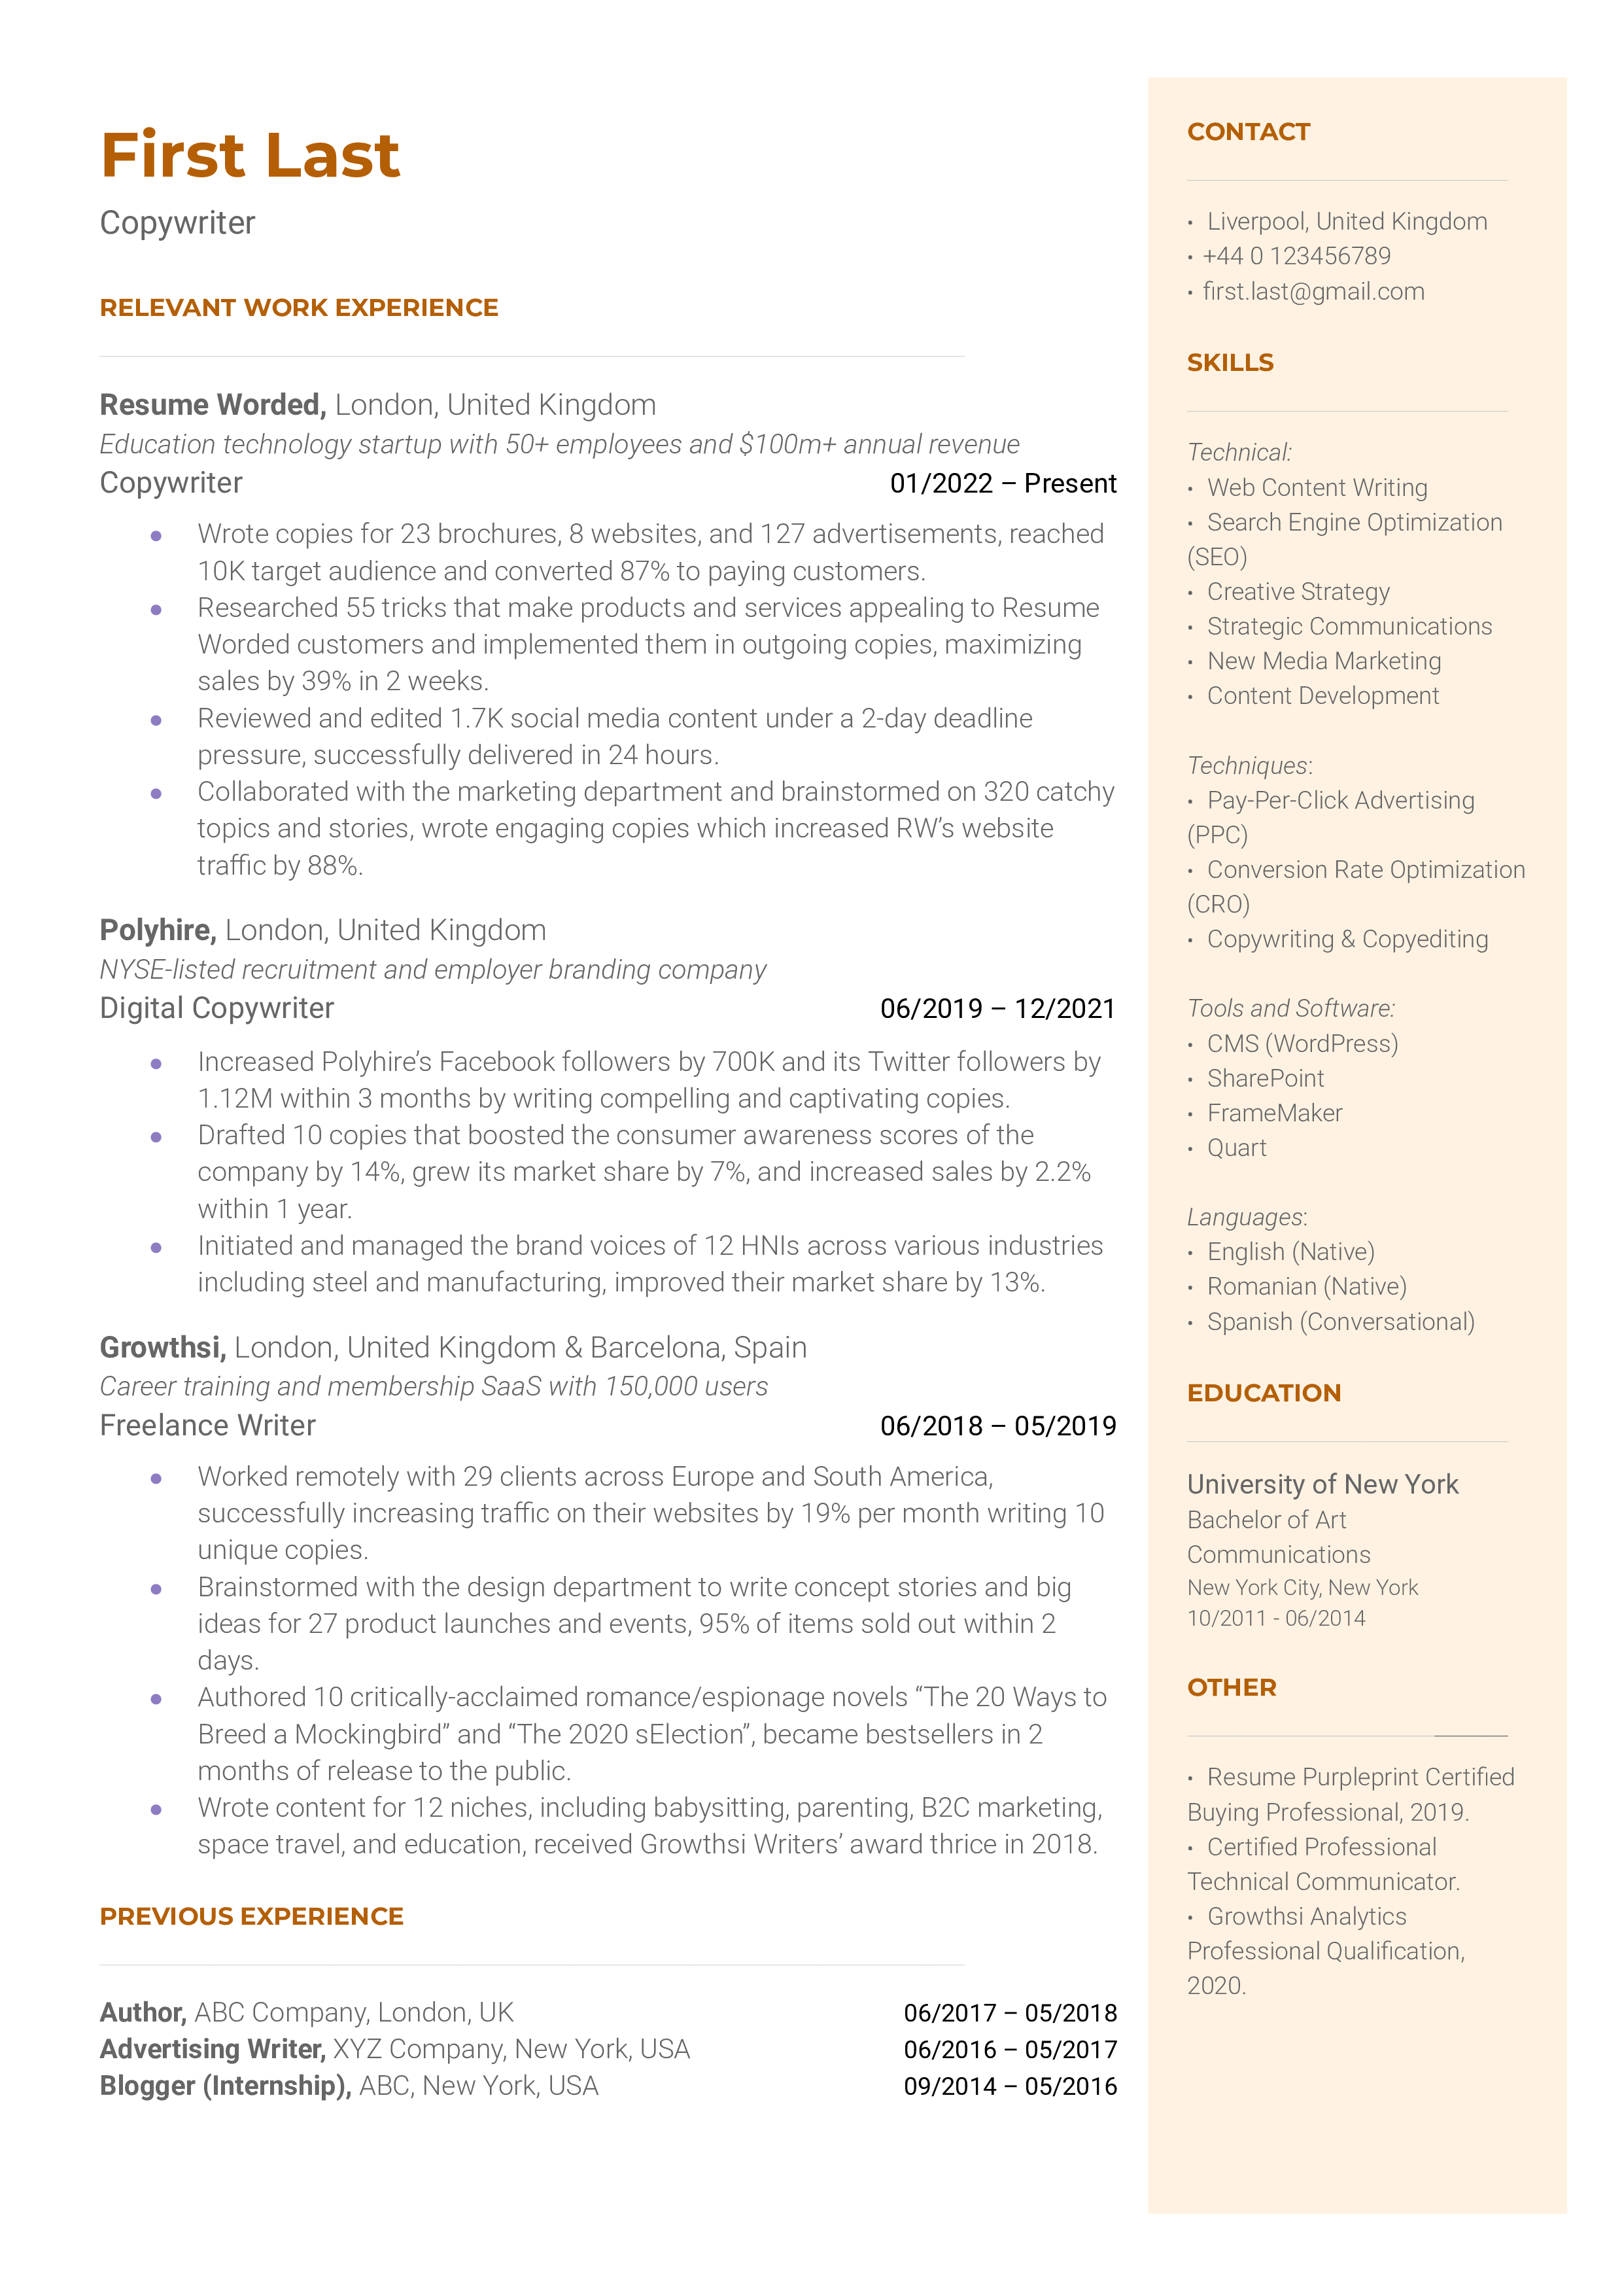 Copywriter resume sample with highlights on work portfolio and applicant's value addition.